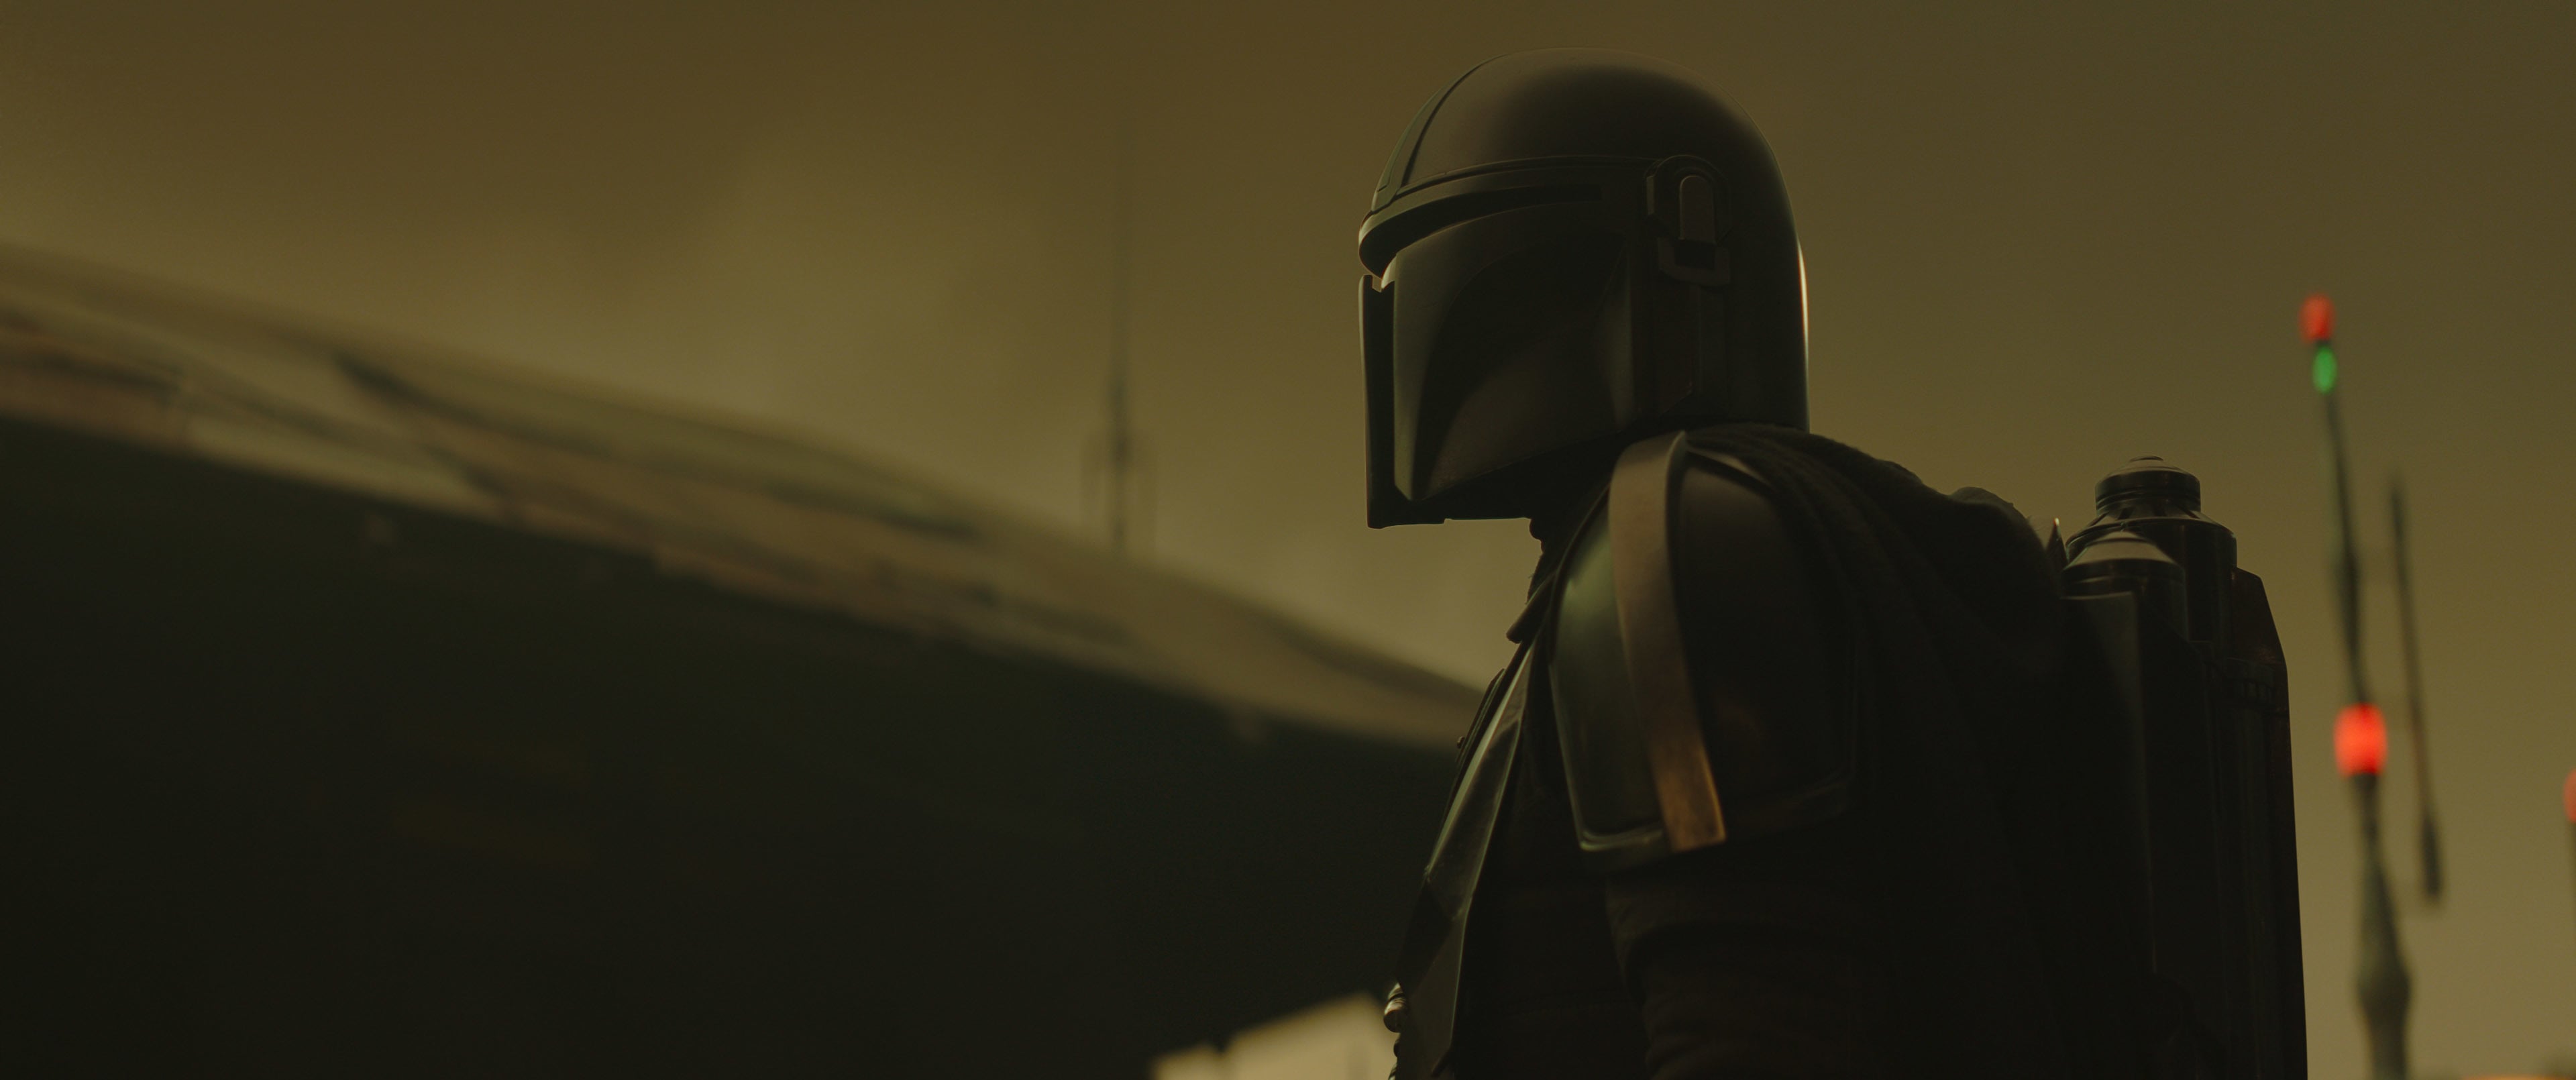 The Mandalorian Season 3 Release Date, Cast, Plot, and Much More